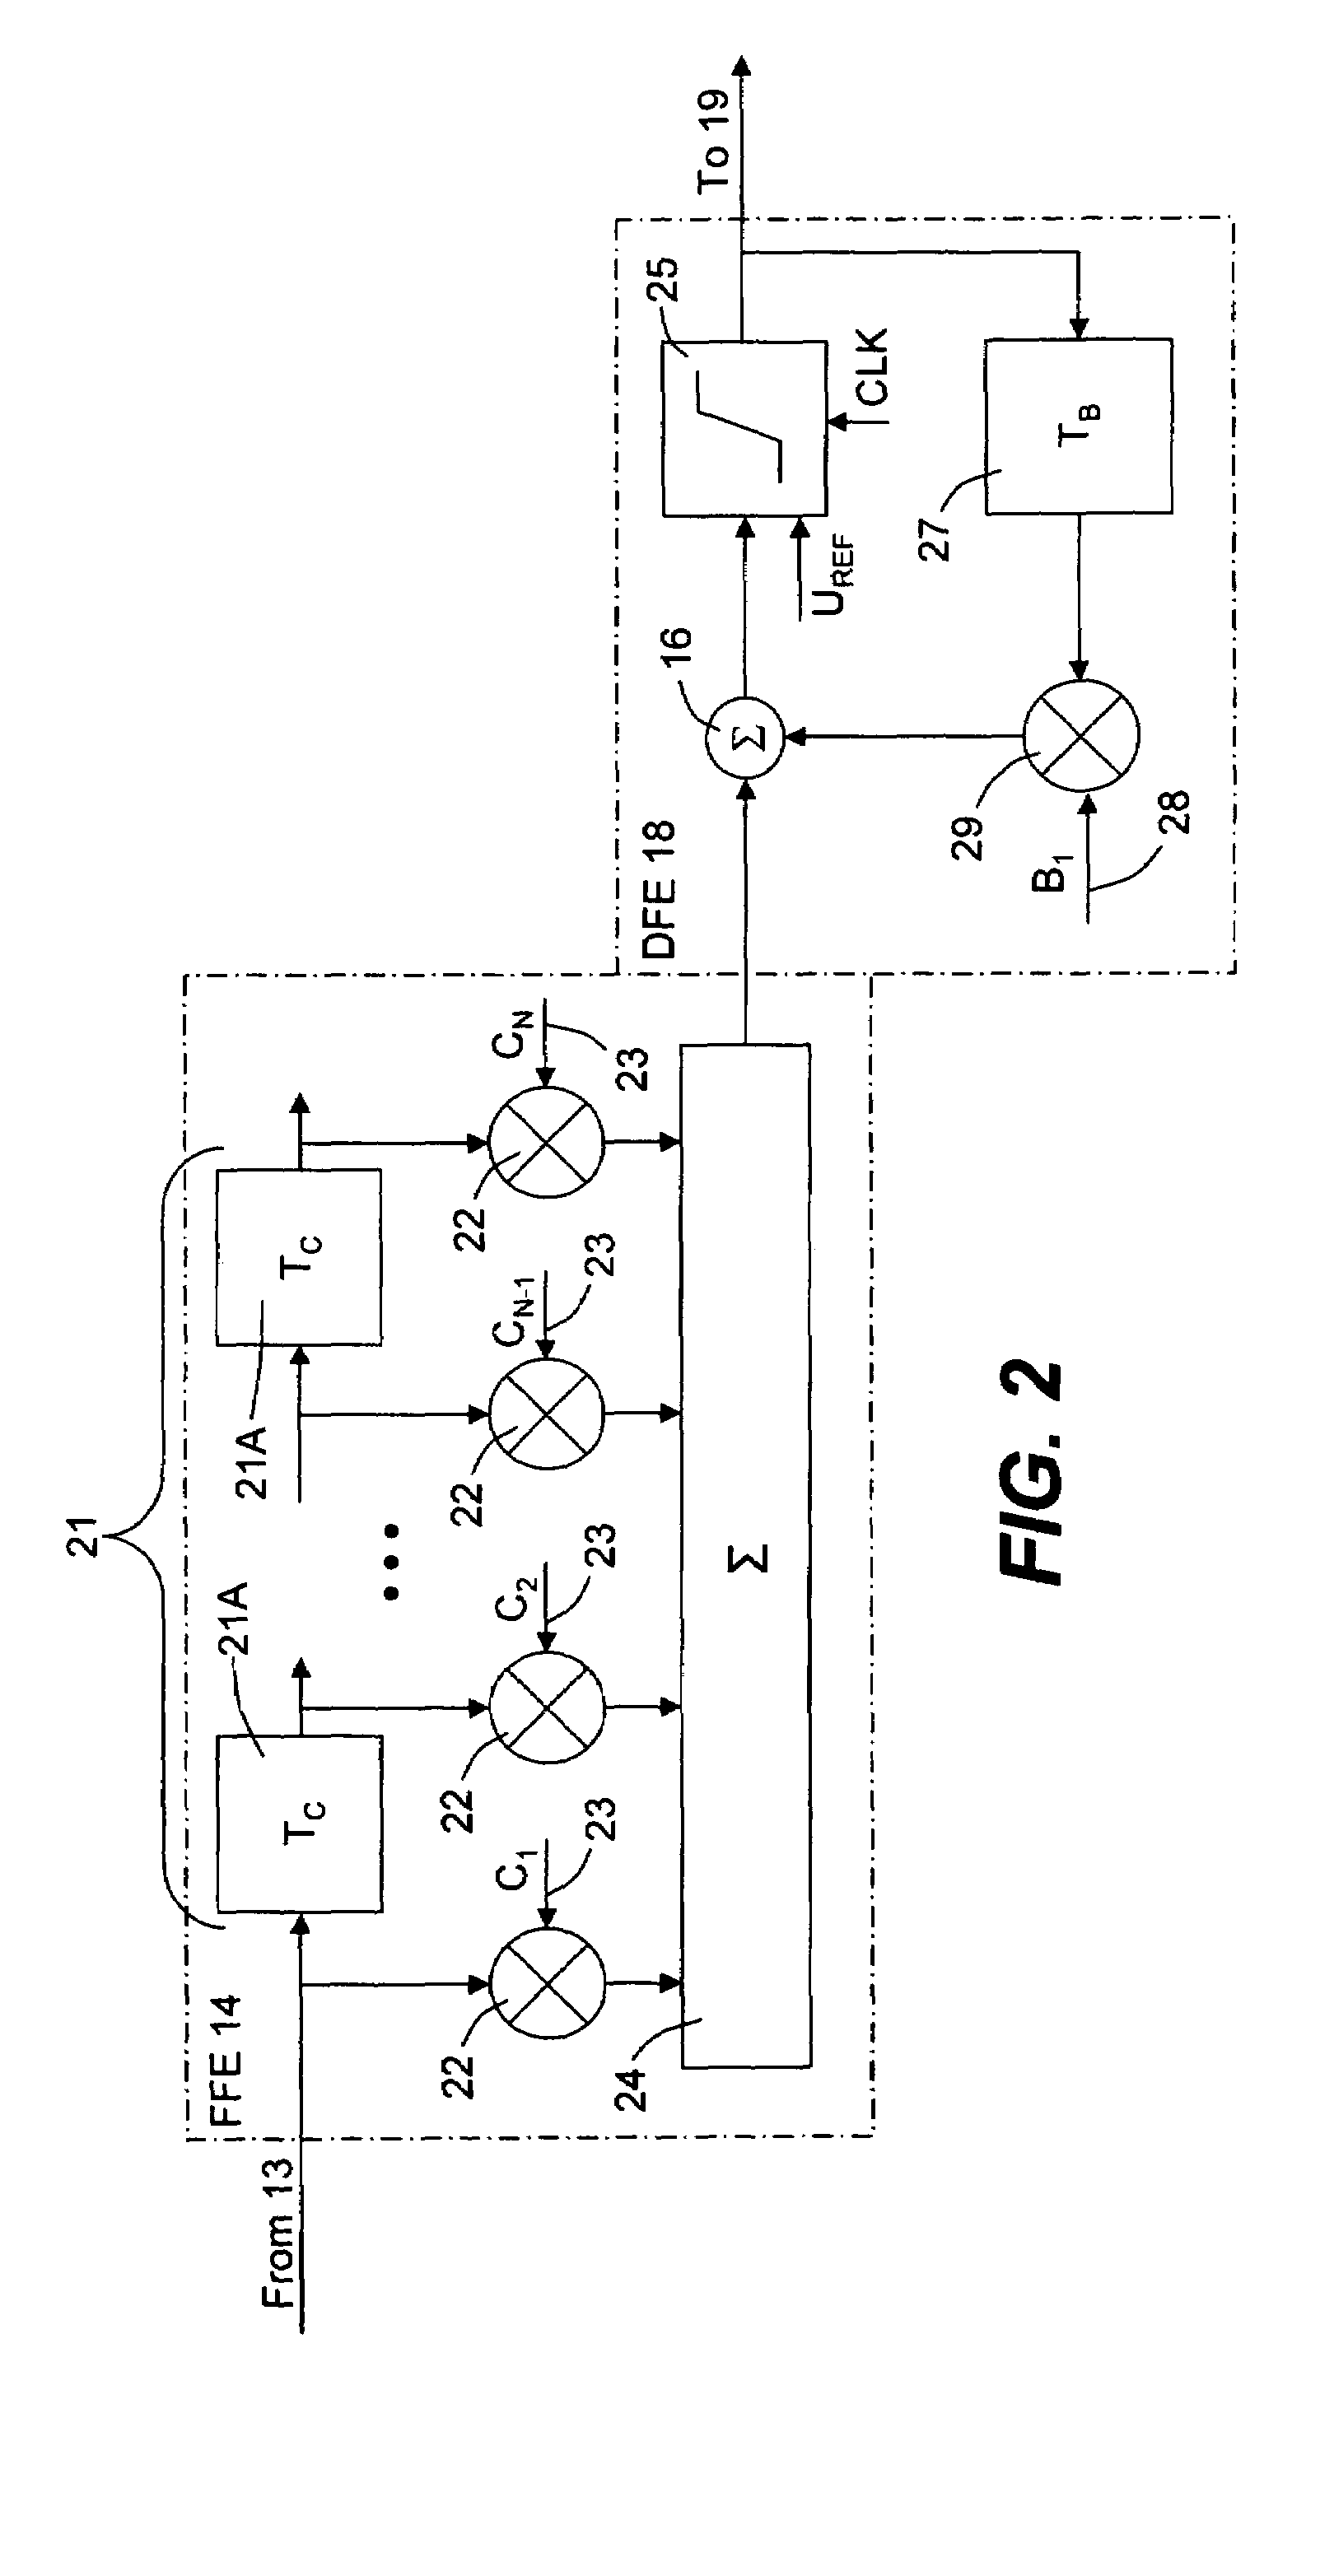 Transmission line with low dispersive properties and its application in equalization